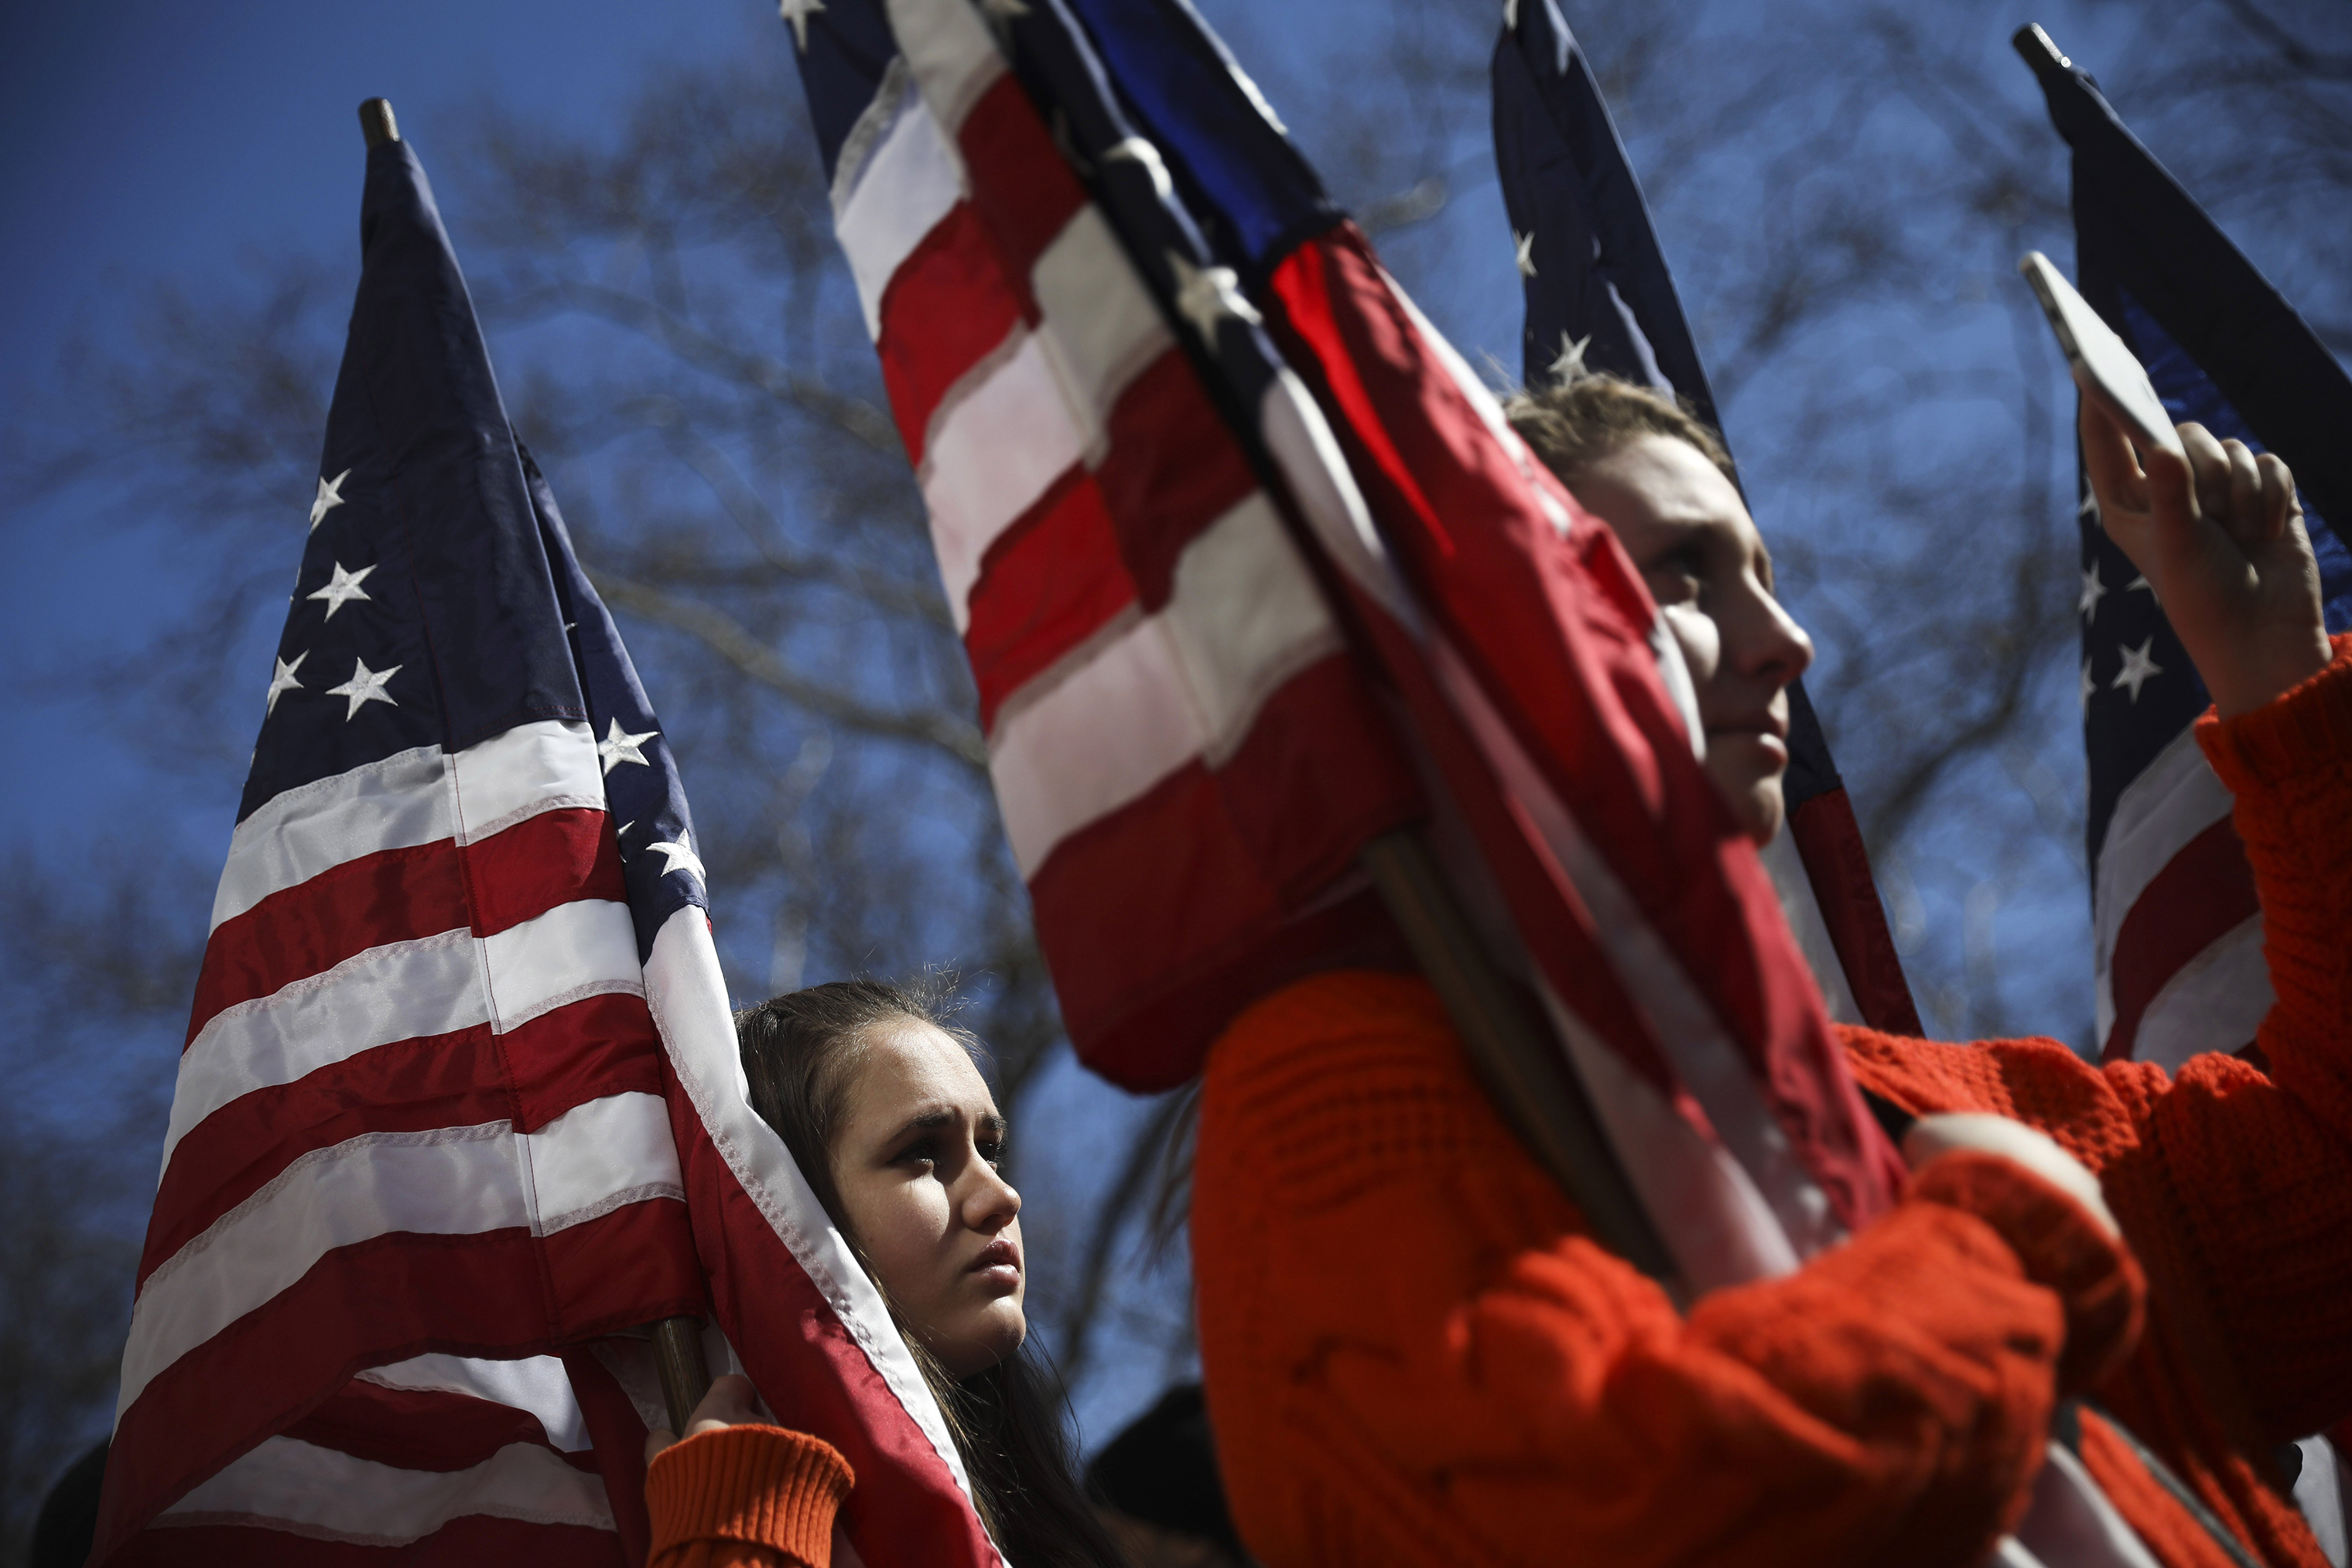 High school students from New Jersey hold American flags as they attend the March For Our Lives near Columbus Circle. (Drew Angerer—Getty Images)